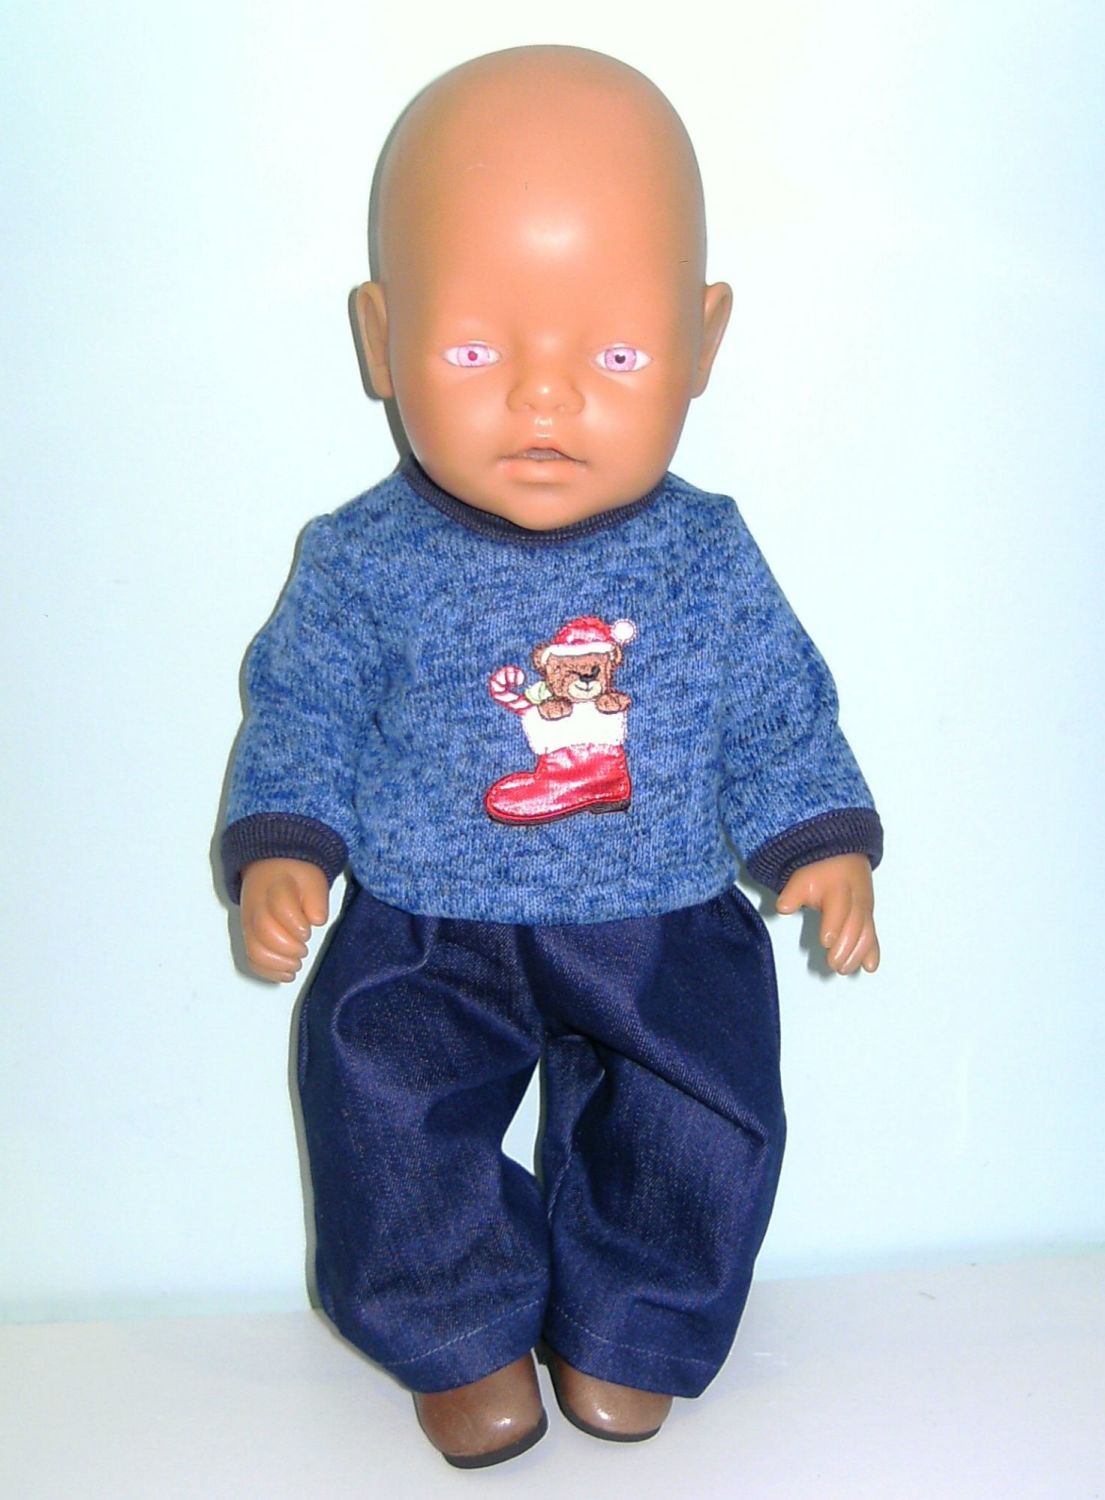 Doll's Christmas jumper outfit to fit baby Born Boy